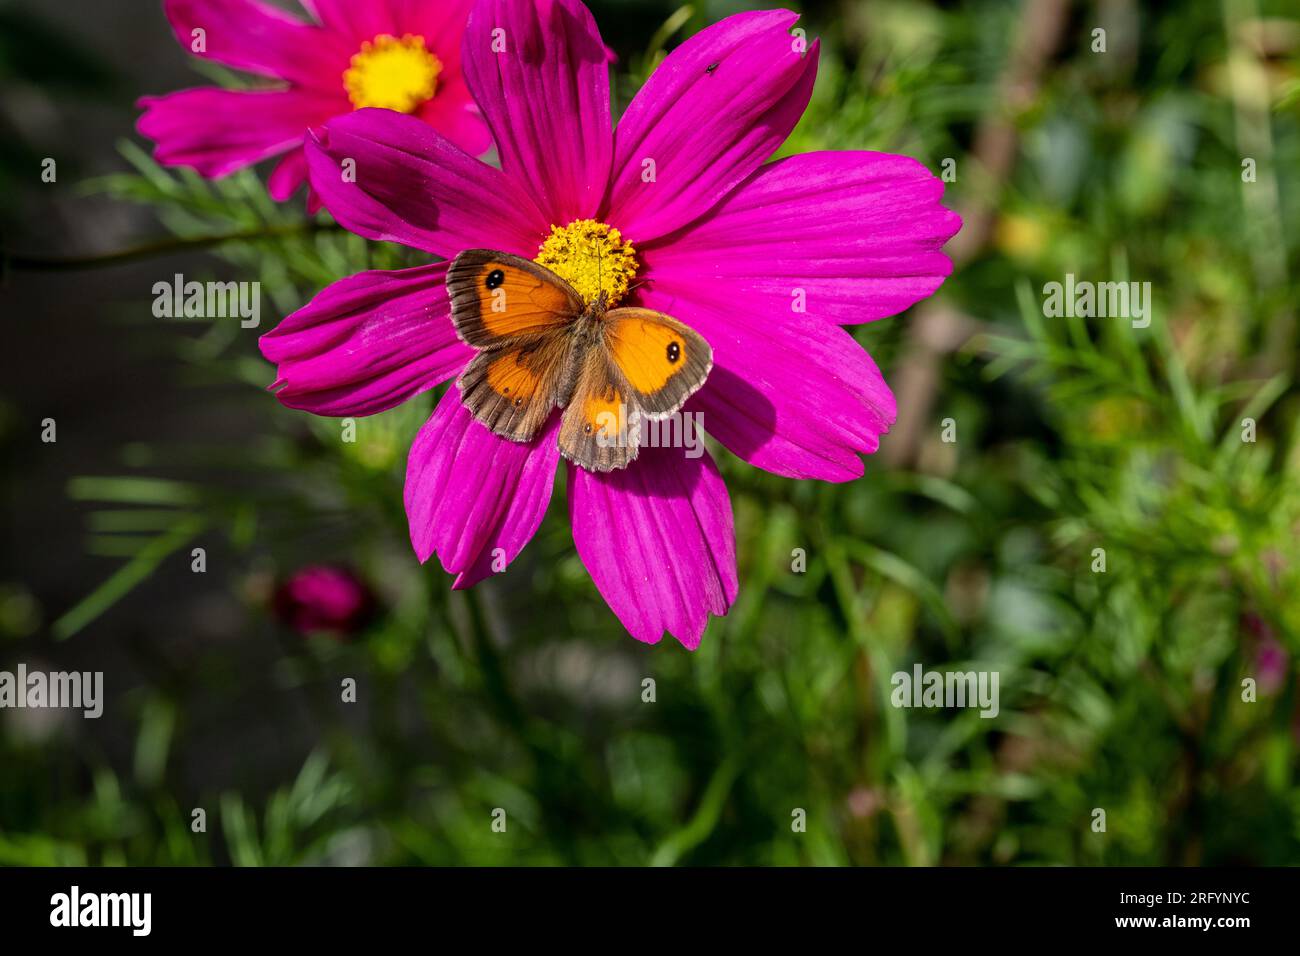 Gate Keeper Butterfly on bright pink flower Stock Photo